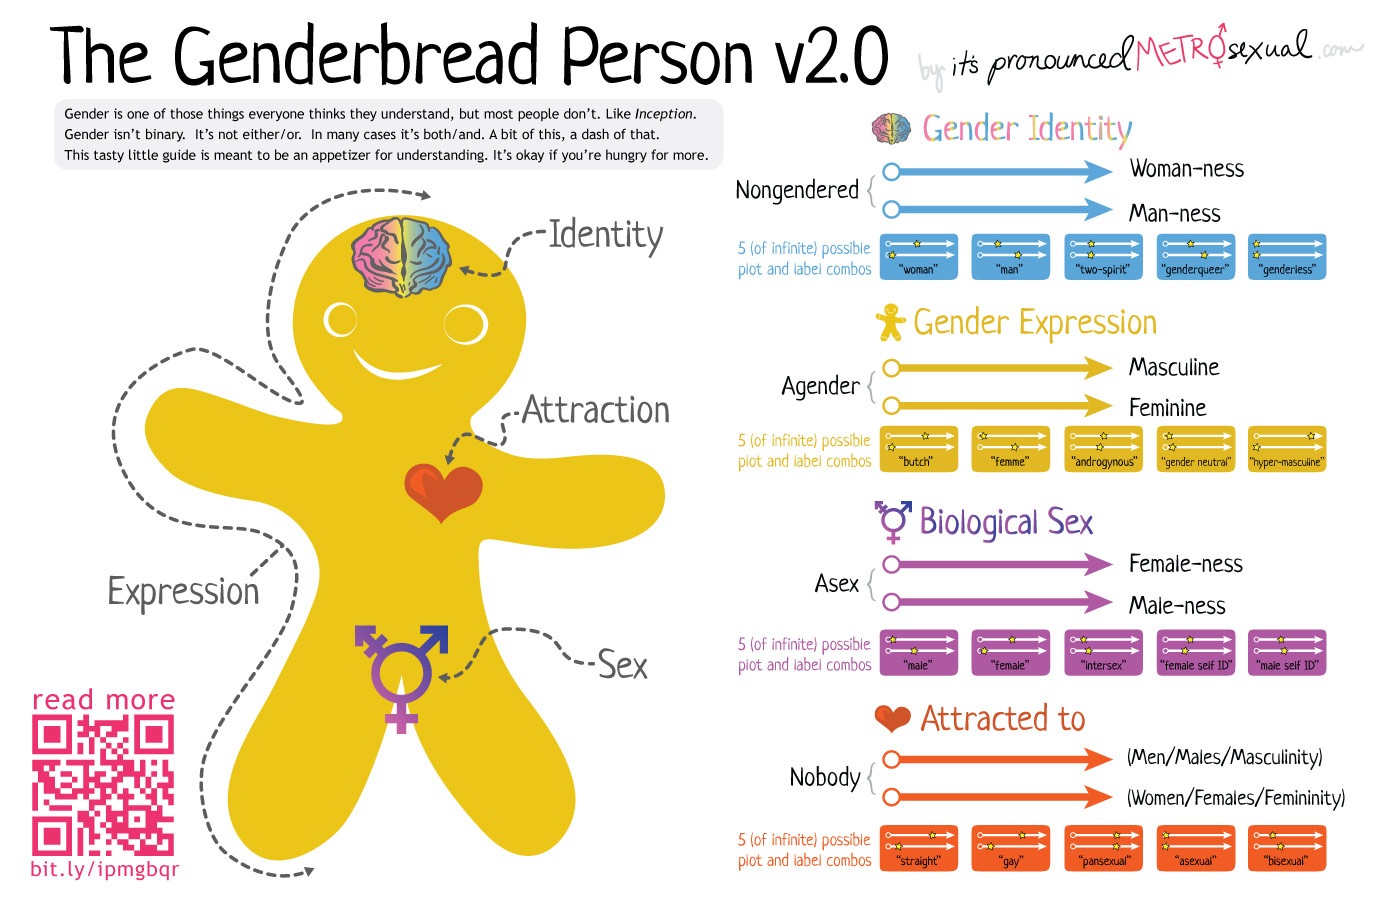 The Genderbread Person explains gender identity, gender expression, biological sex, and sexual orientation.^[[Image](https://www.itspronouncedmetrosexual.com/2012/03/the-genderbread-person-v2-0/) by [it’s pronounced METROsexual](https://www.itspronouncedmetrosexual.com/about/)]